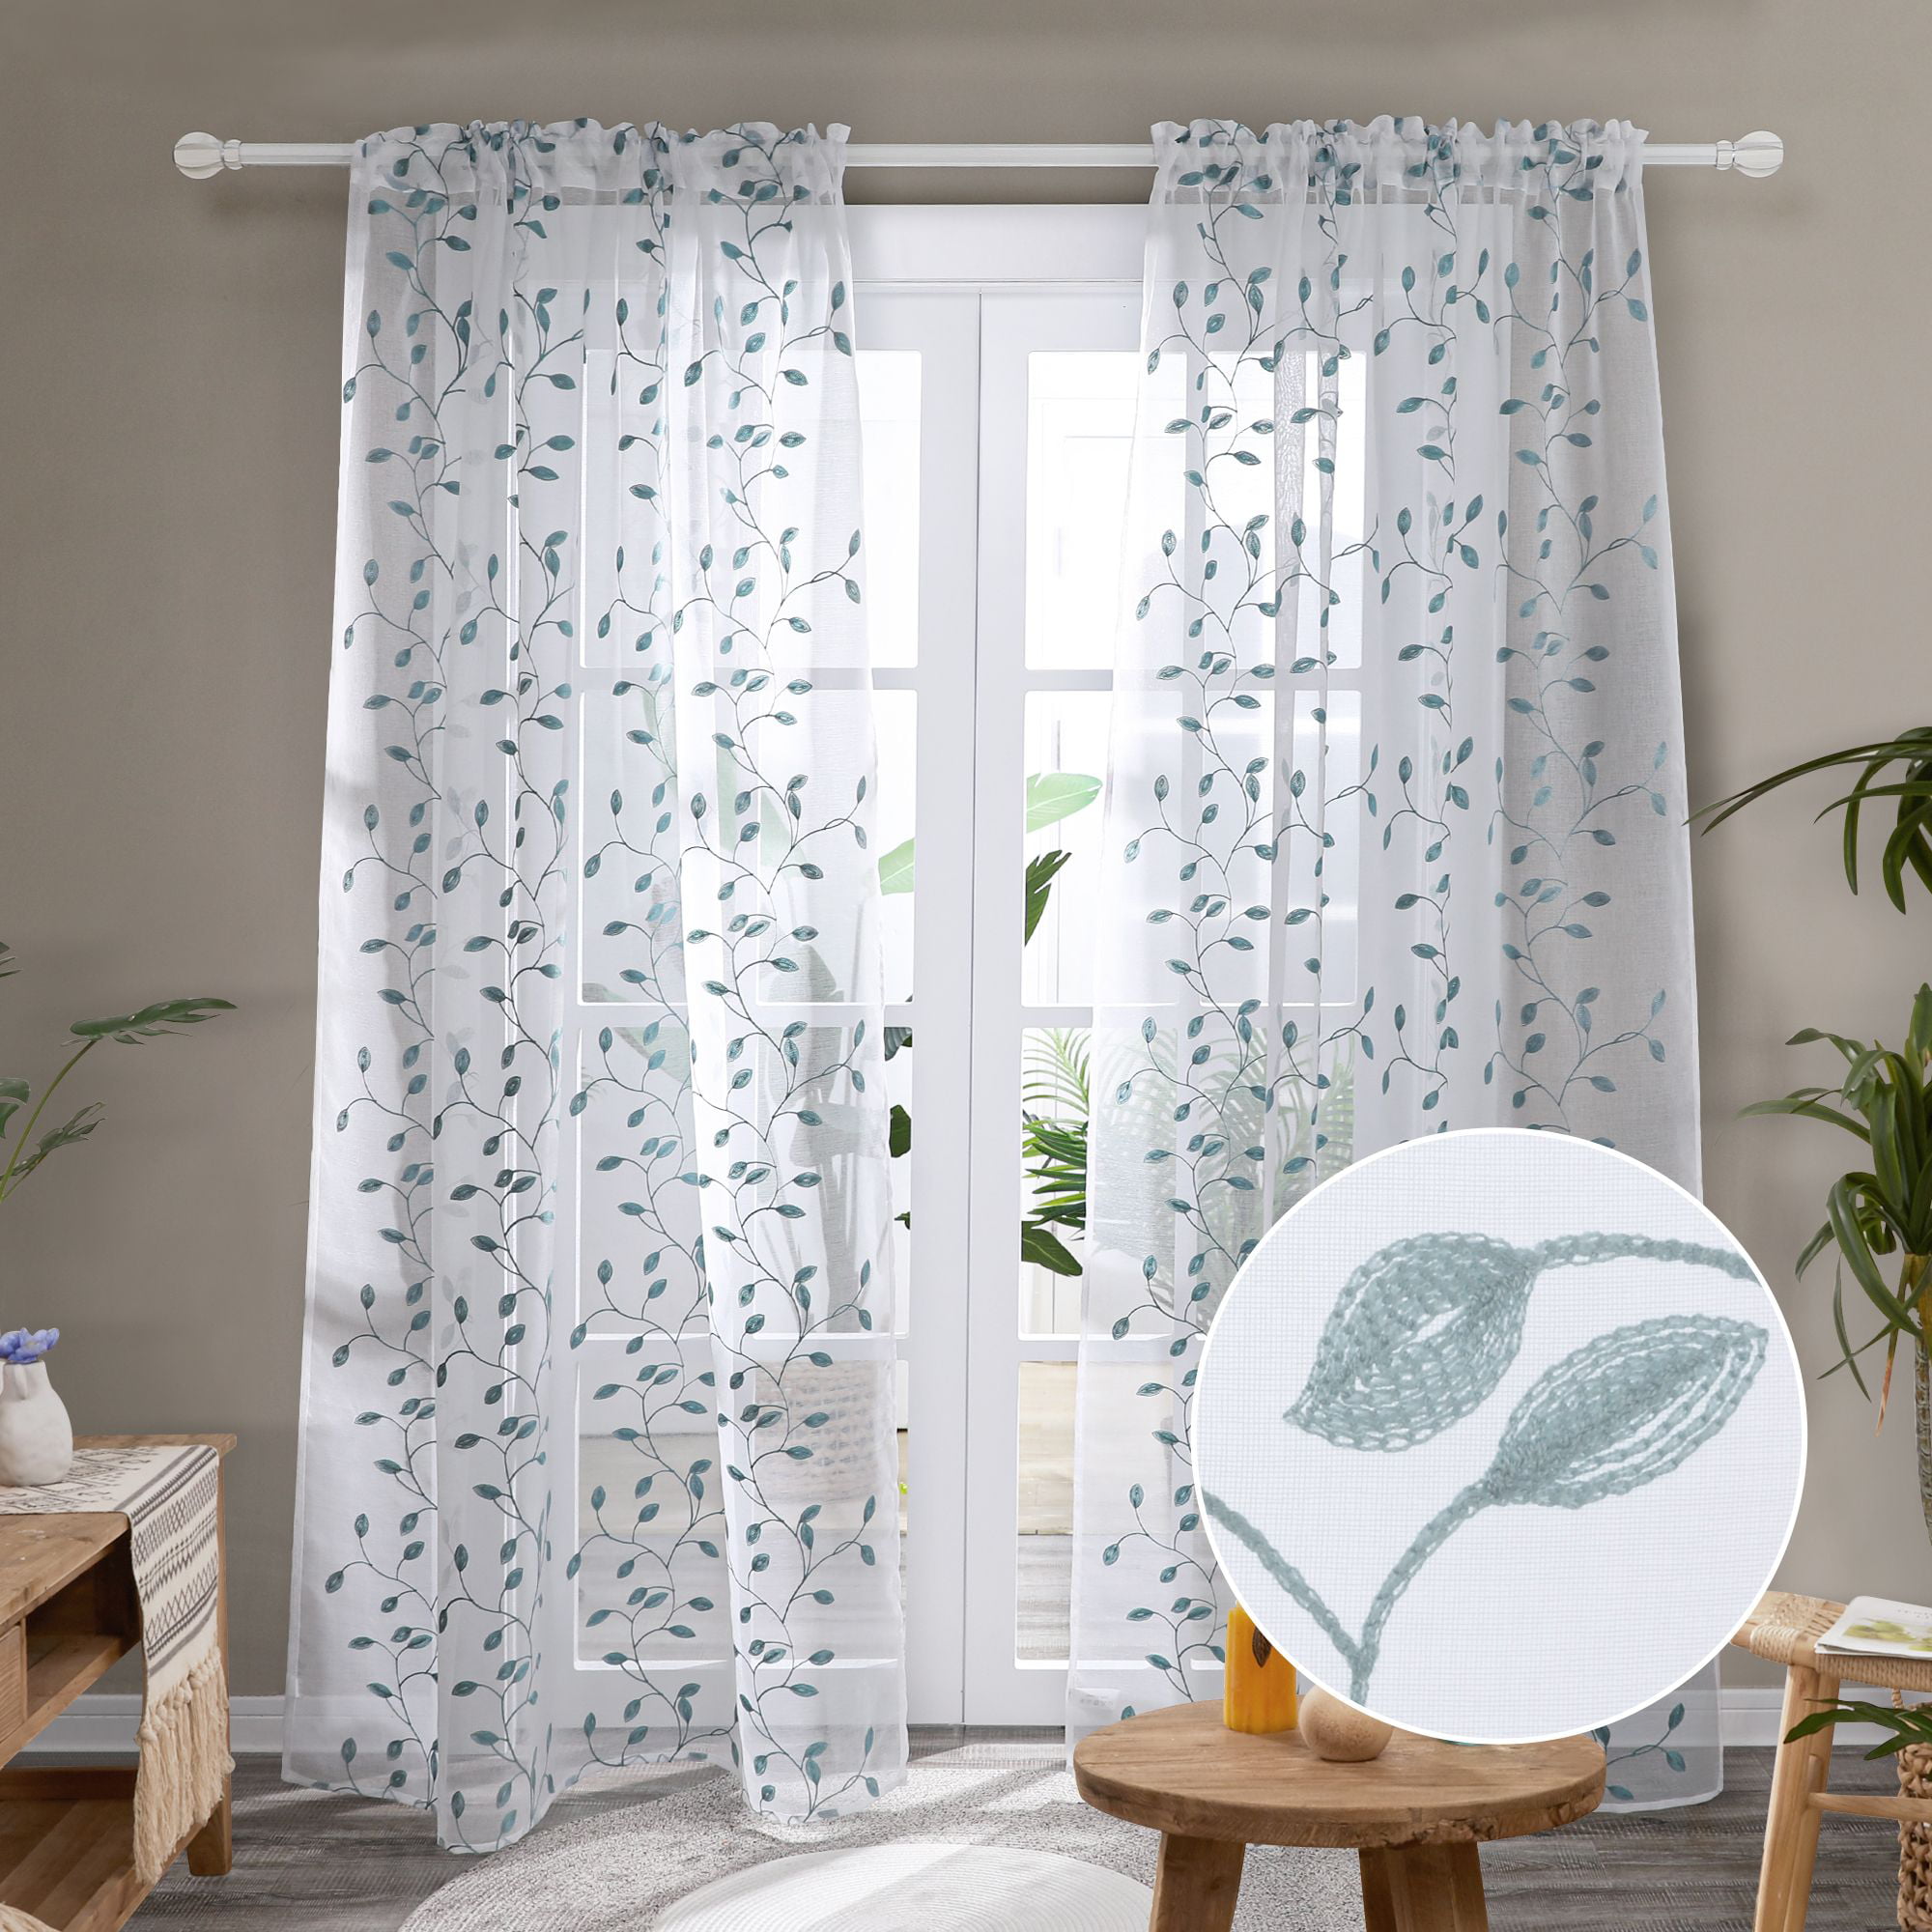 2-PK Deconovo Leaf Embroidered Sheer Curtains $5.73-$9.40 (6 Colors) Free S&H w/Walmart+ or on Orders $35+